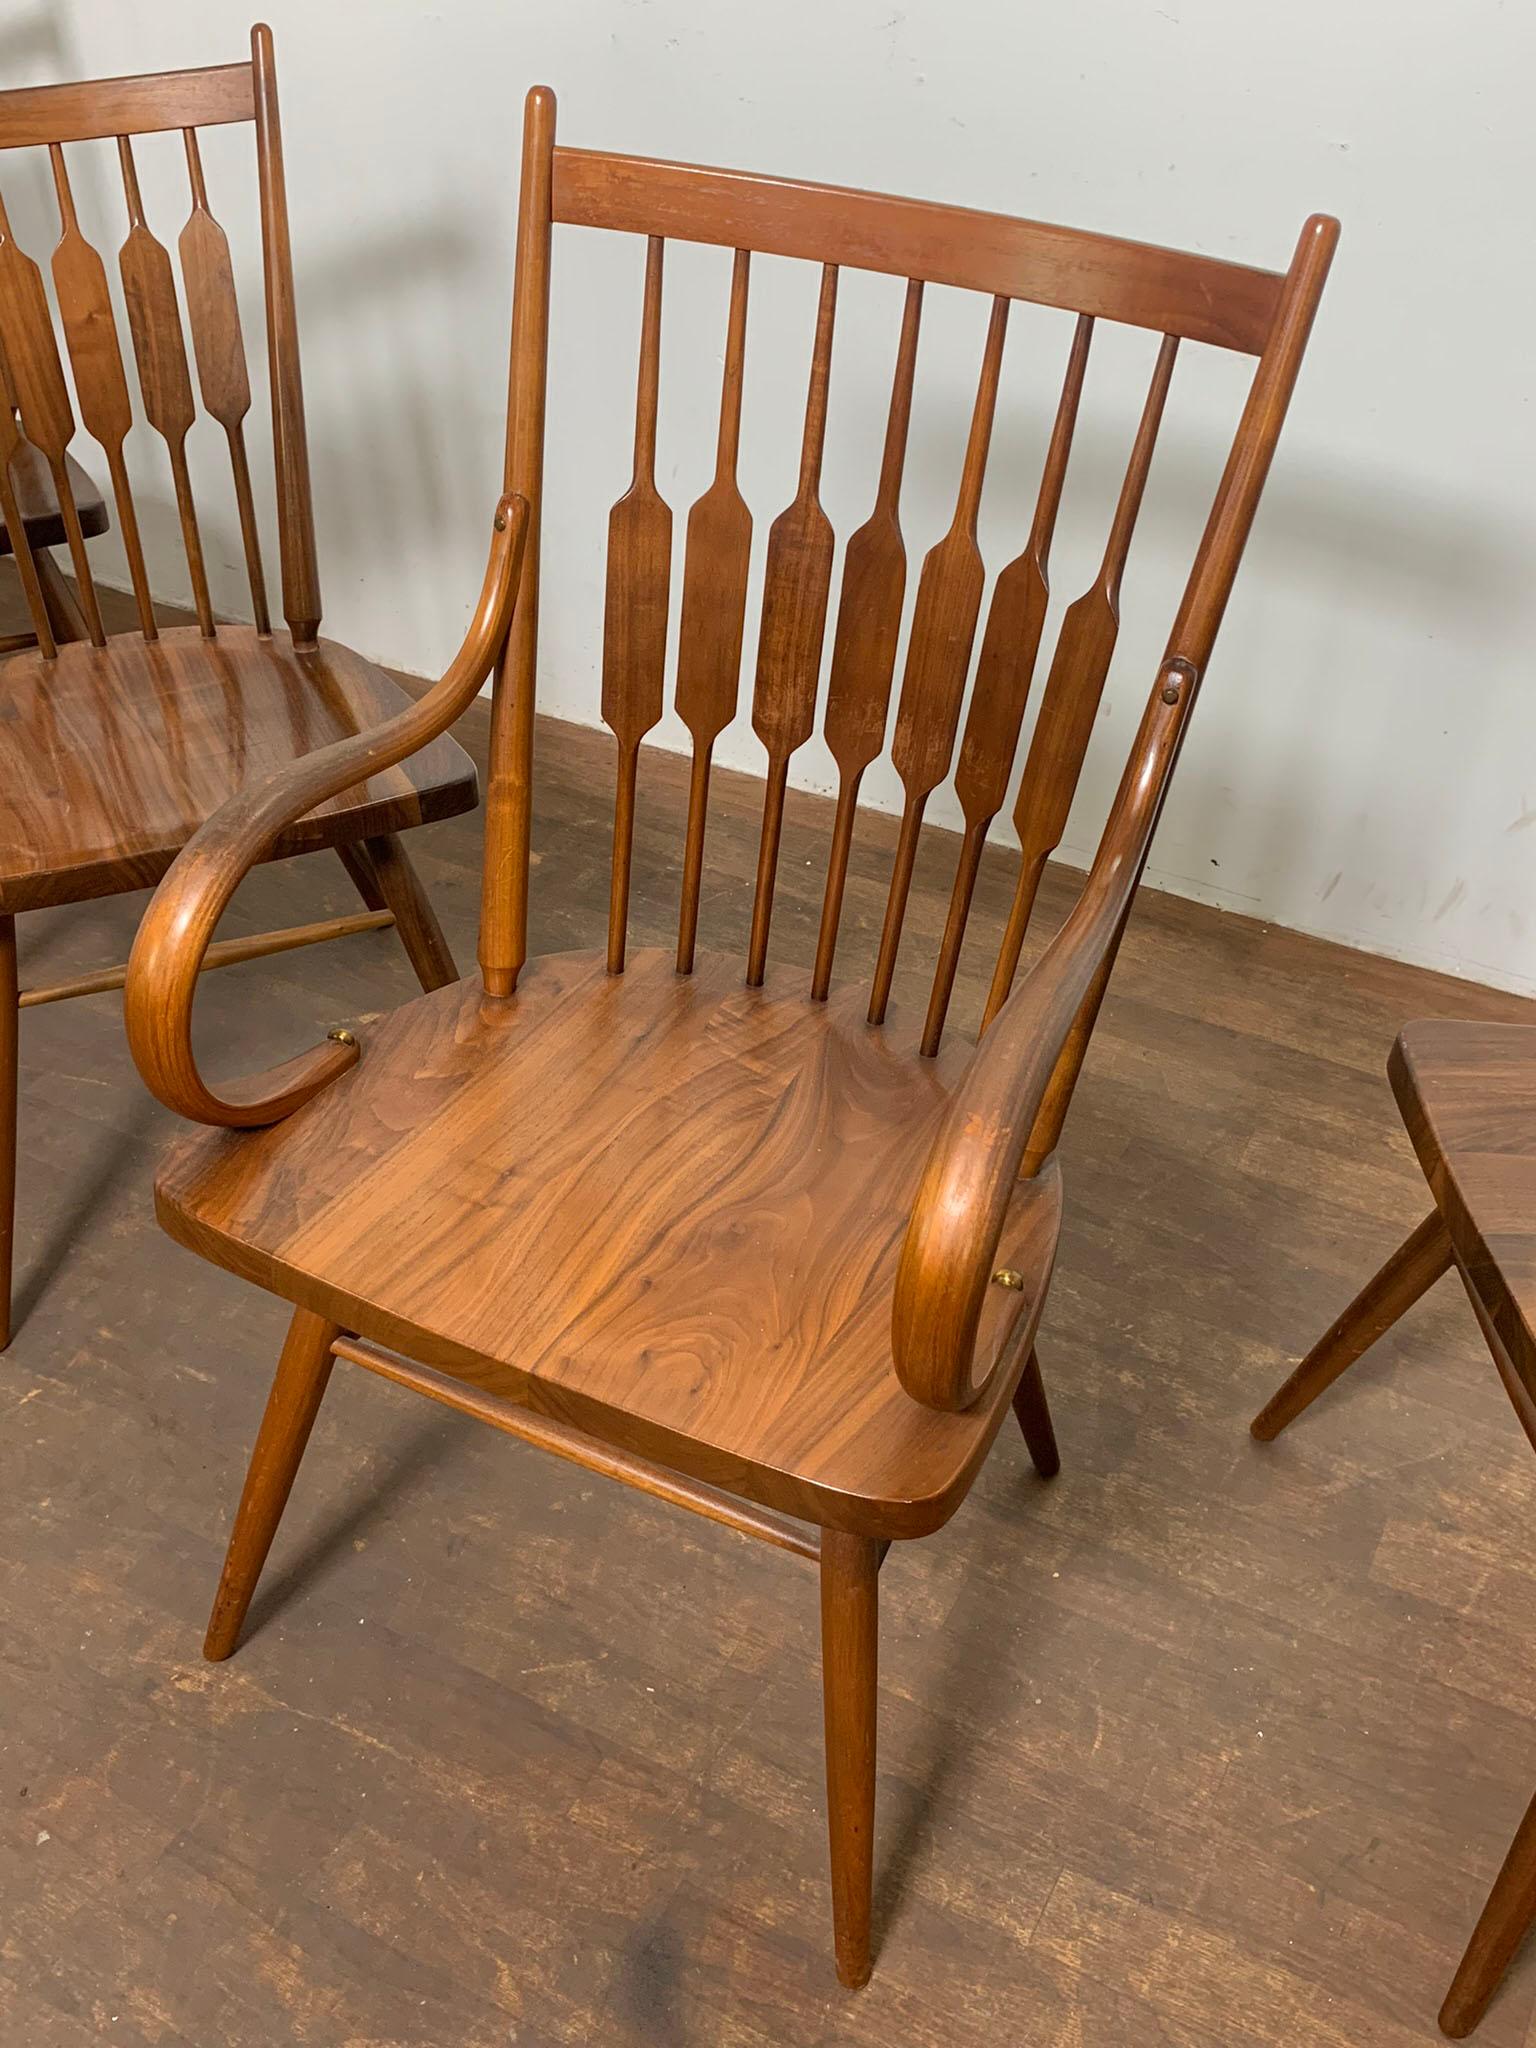 Set of five walnut dining chairs designed by Stewart MacDougall & Kipp Stewart for the Drexel Centennial line, circa 1960s.

Arm chairs measure 21